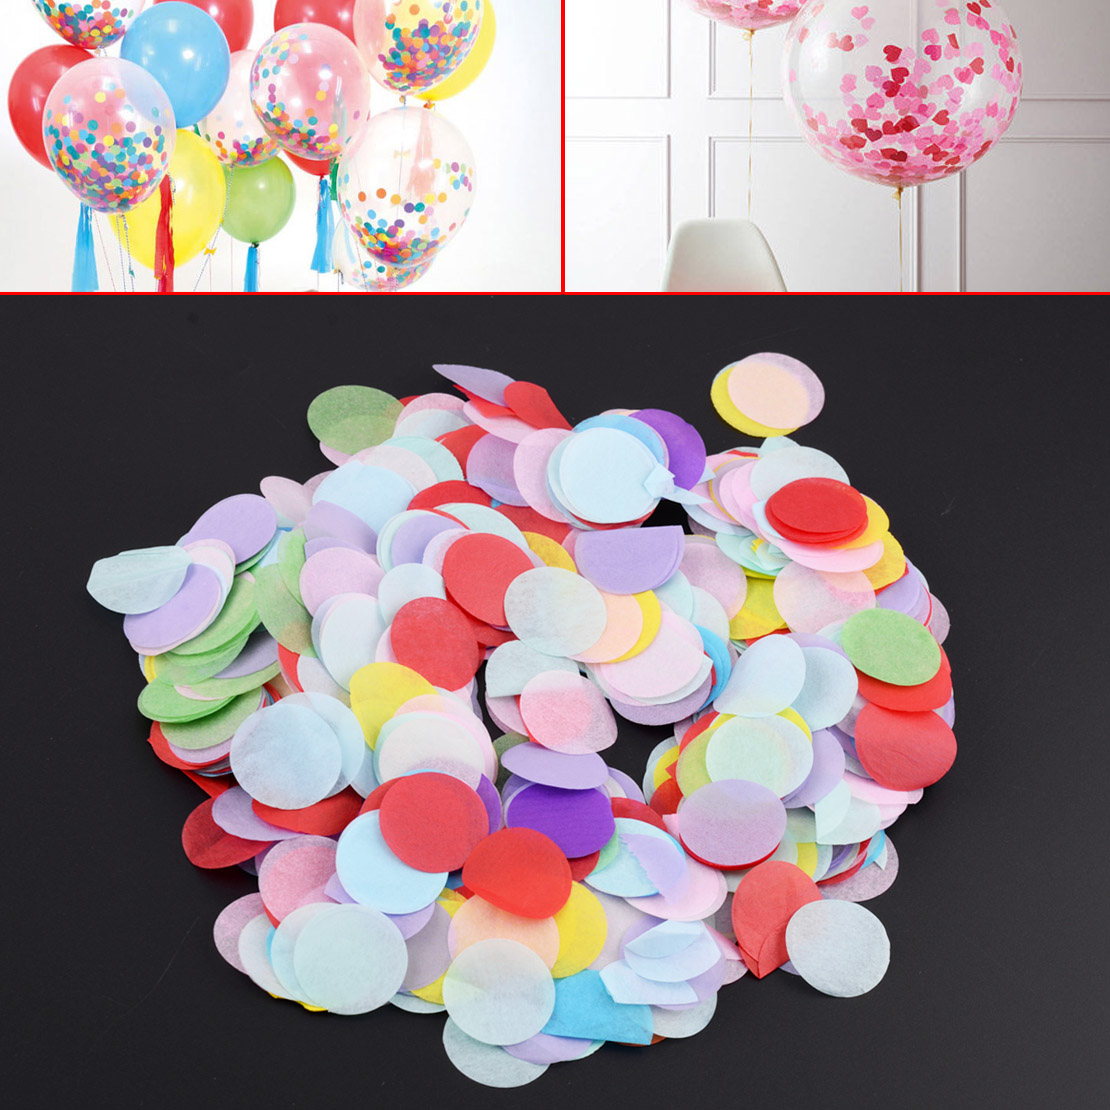 10g Round Throwing Confetti Colorful Tissue Paper Birthday Party Wedding Decor